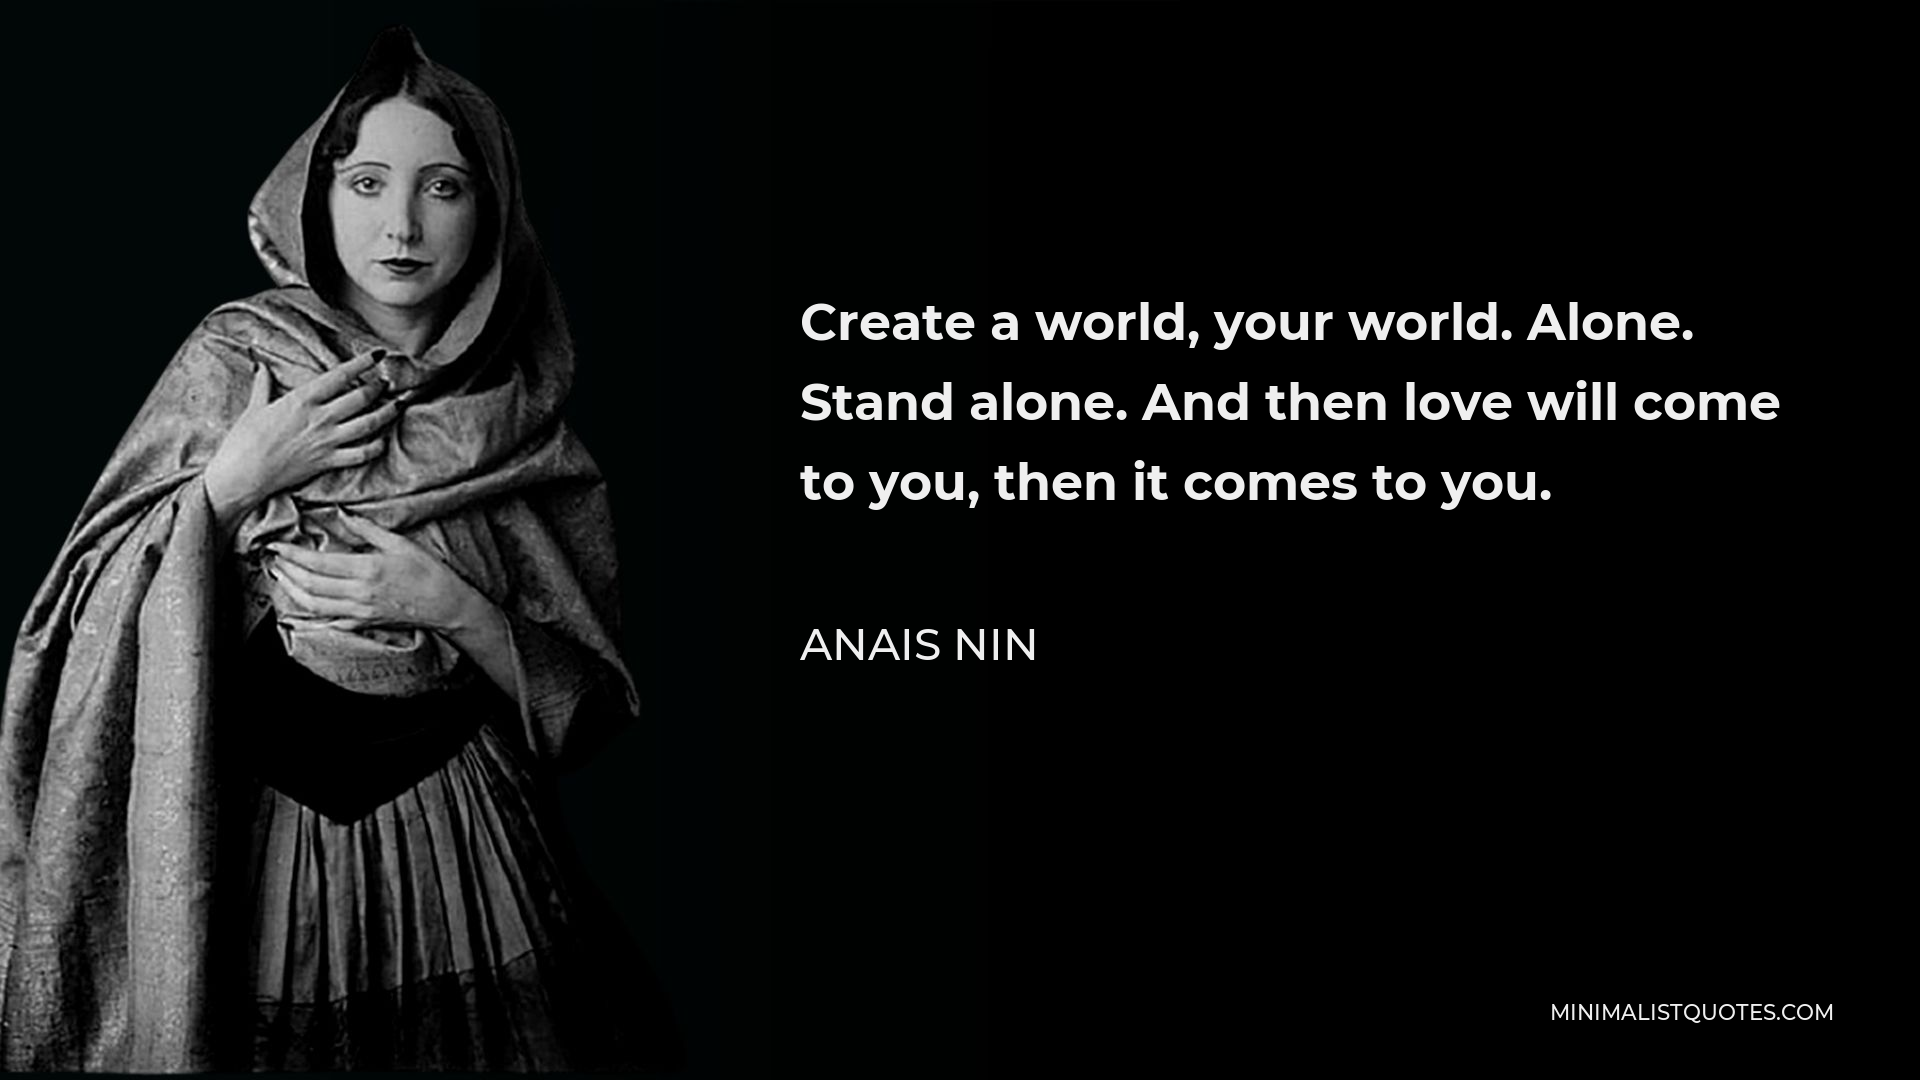 Anais Nin Quote - Create a world, your world. Alone. Stand alone. And then love will come to you, then it comes to you.